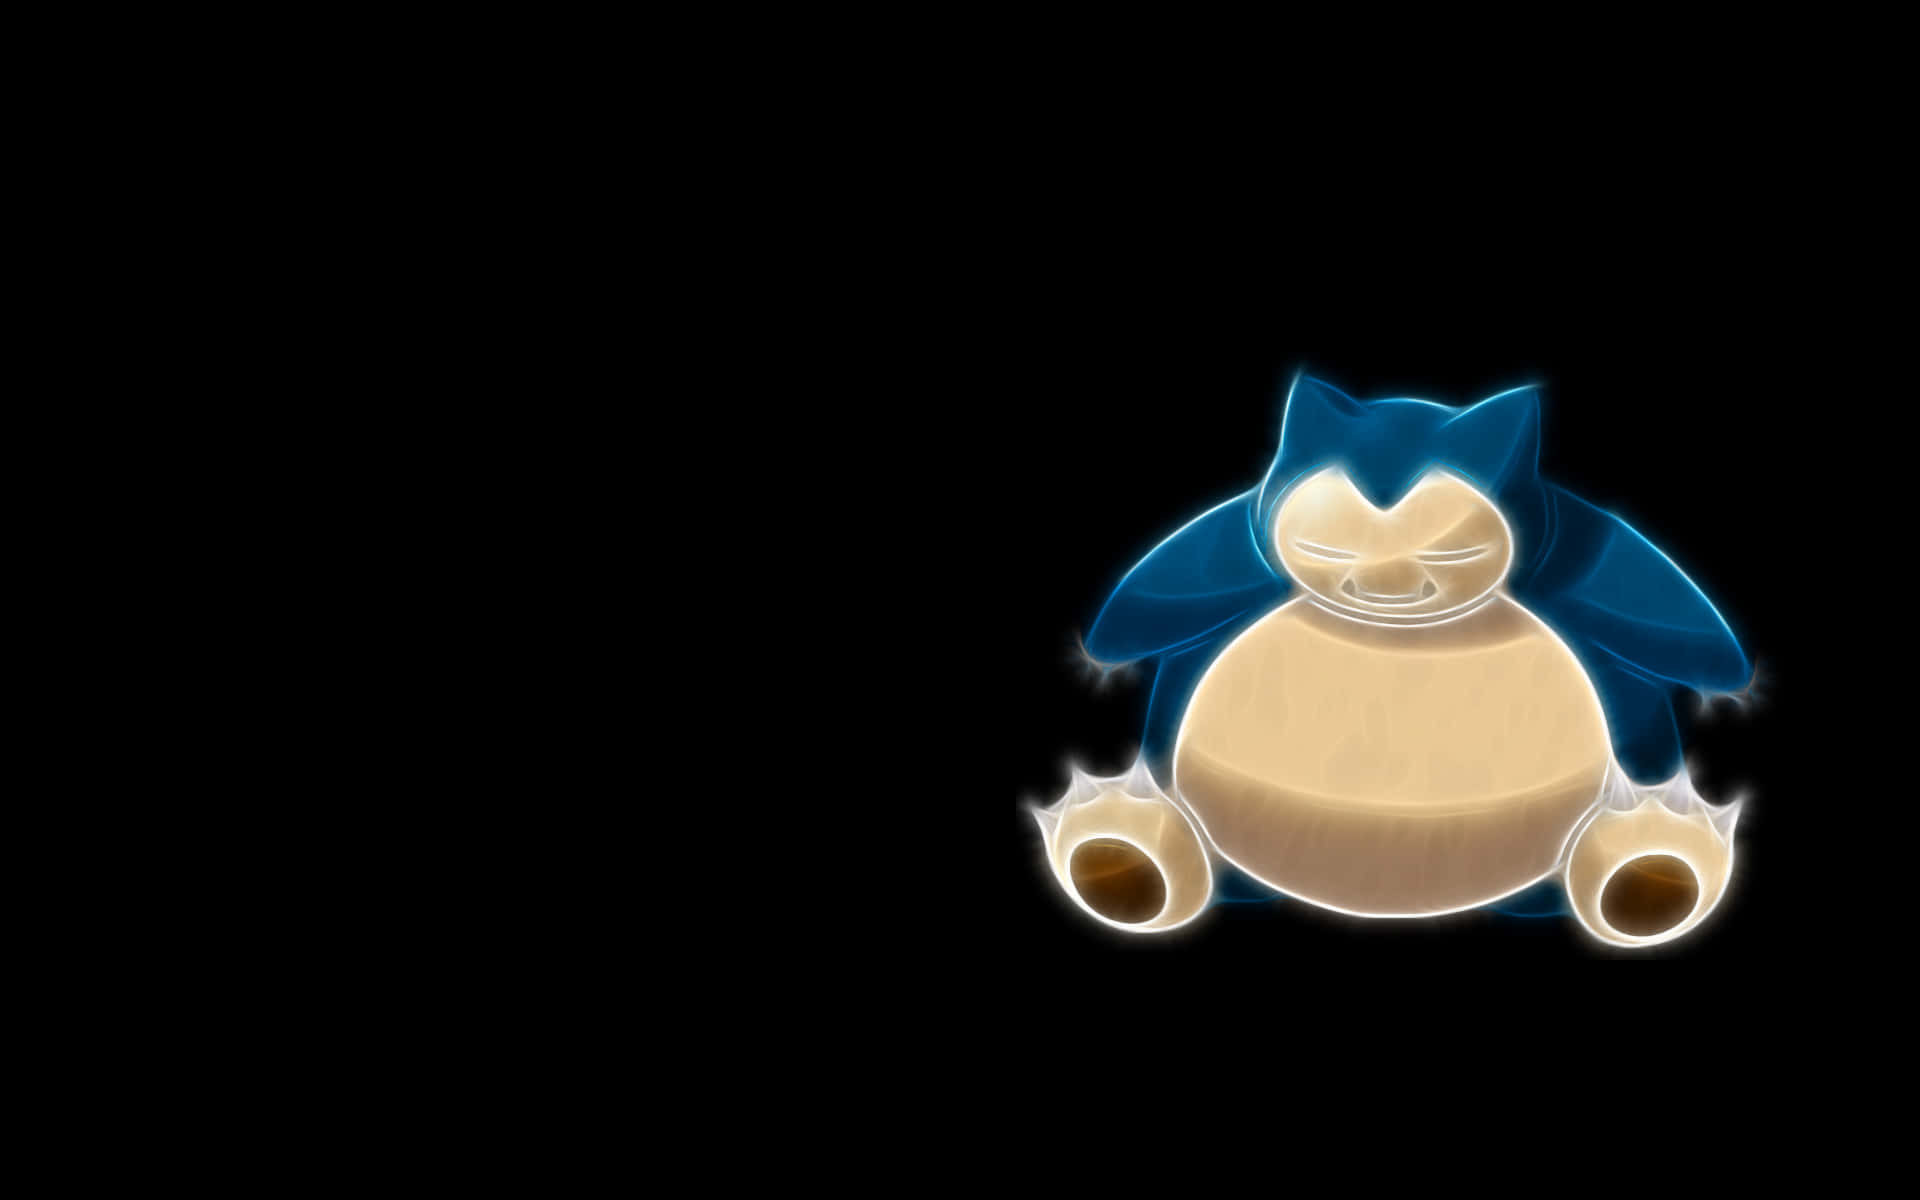 "Catch yourself The Ultimate Relaxation with a Snorlax!"